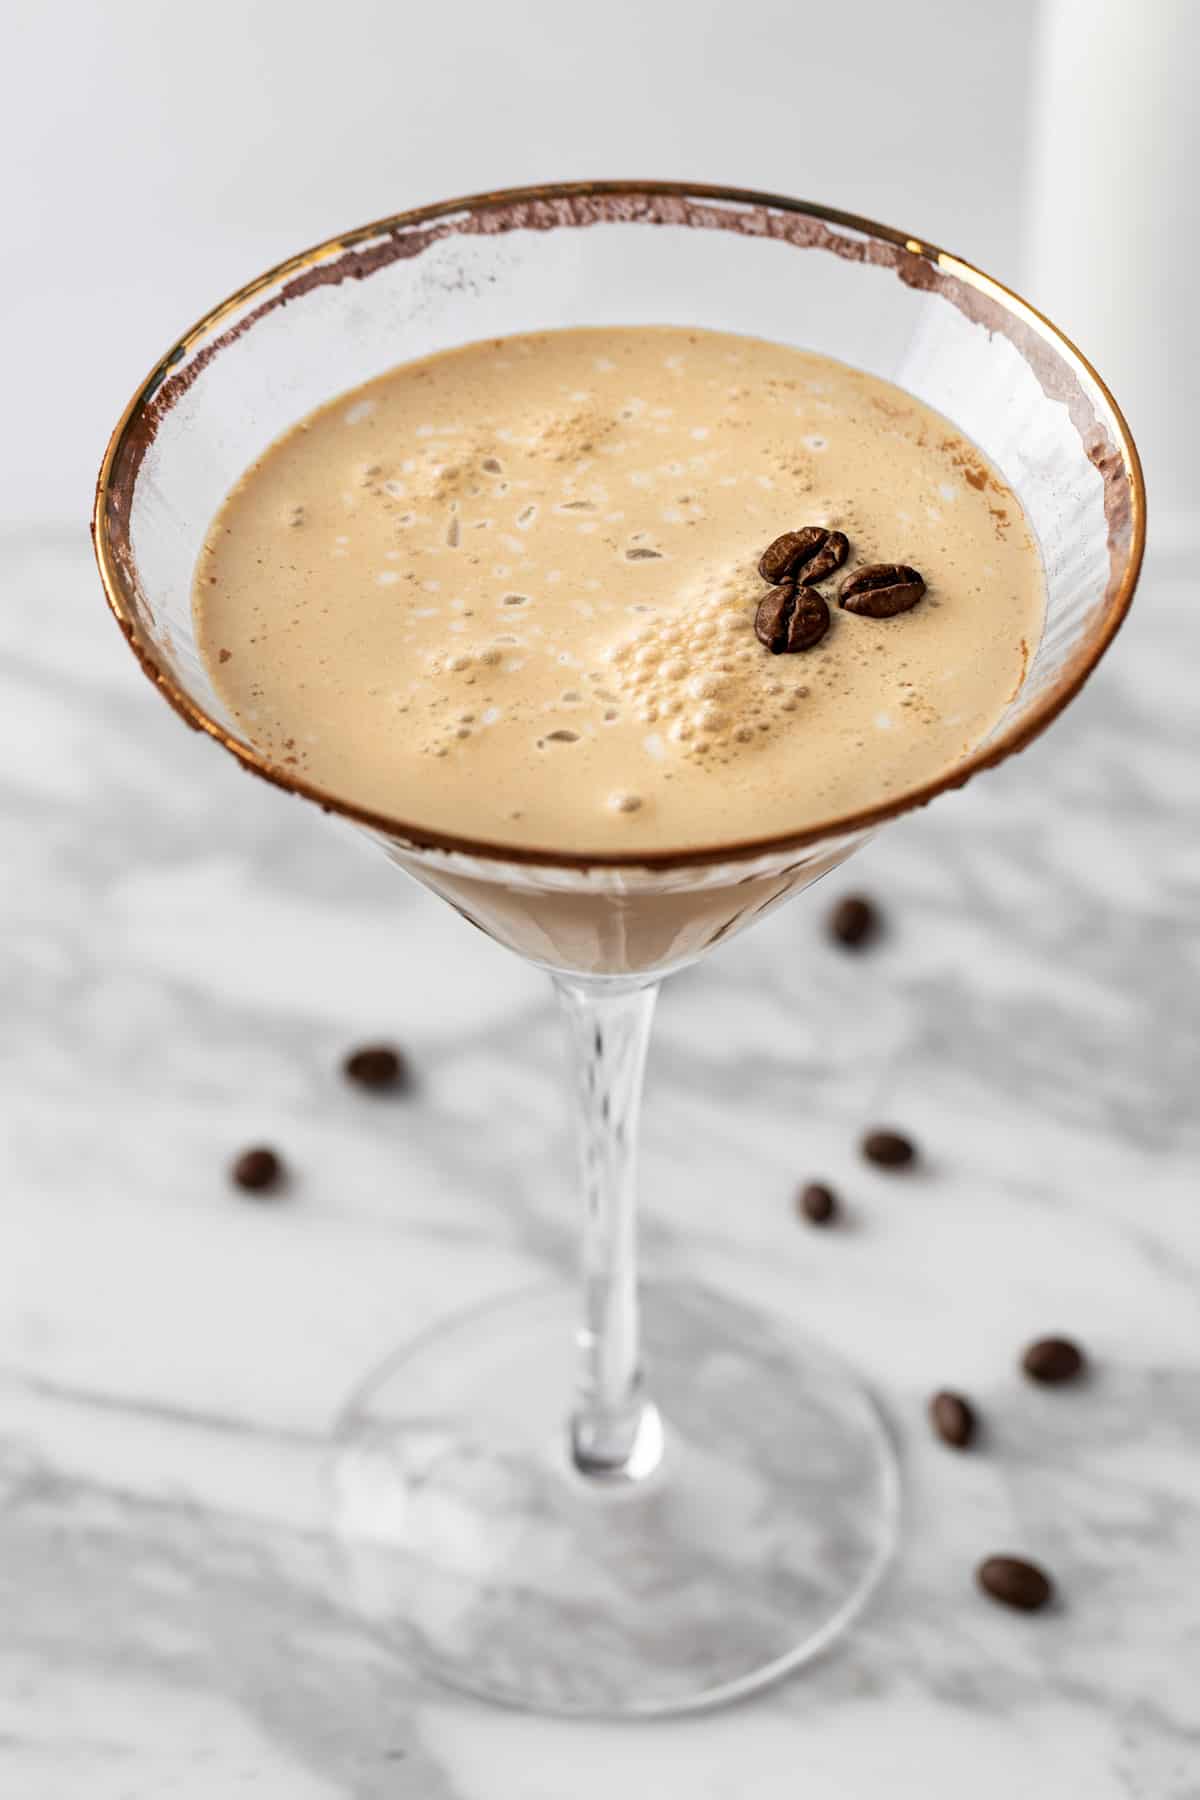 An espresso martini mocktail garnished with a cocoa rim and 3 coffee beans.